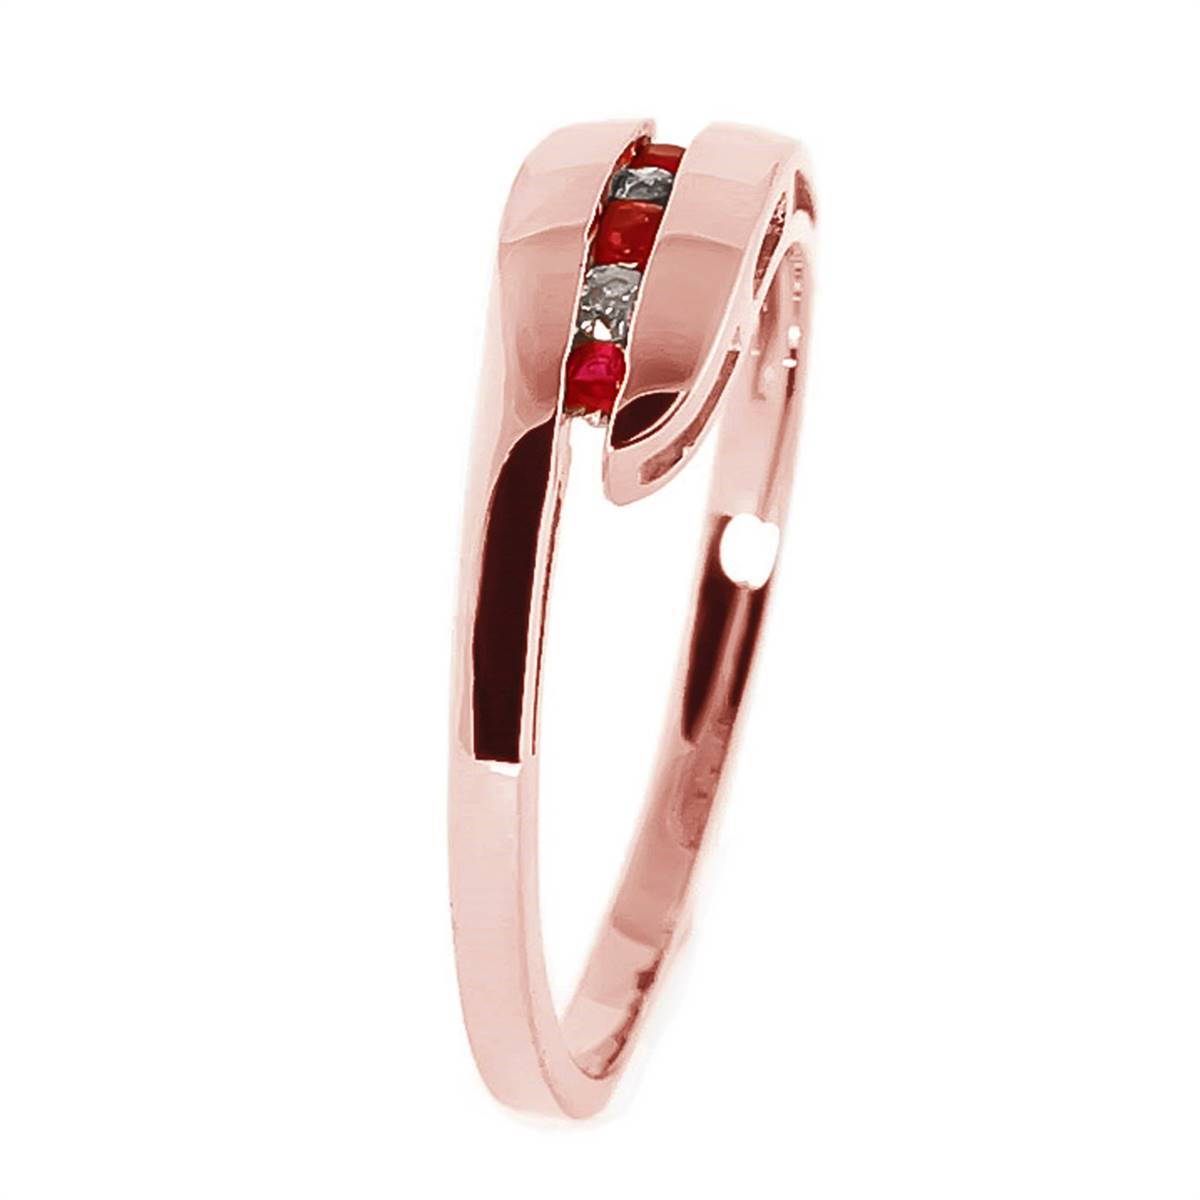 0.25 Carat 14K Solid Rose Gold Ring Channel Set Diamond Ruby